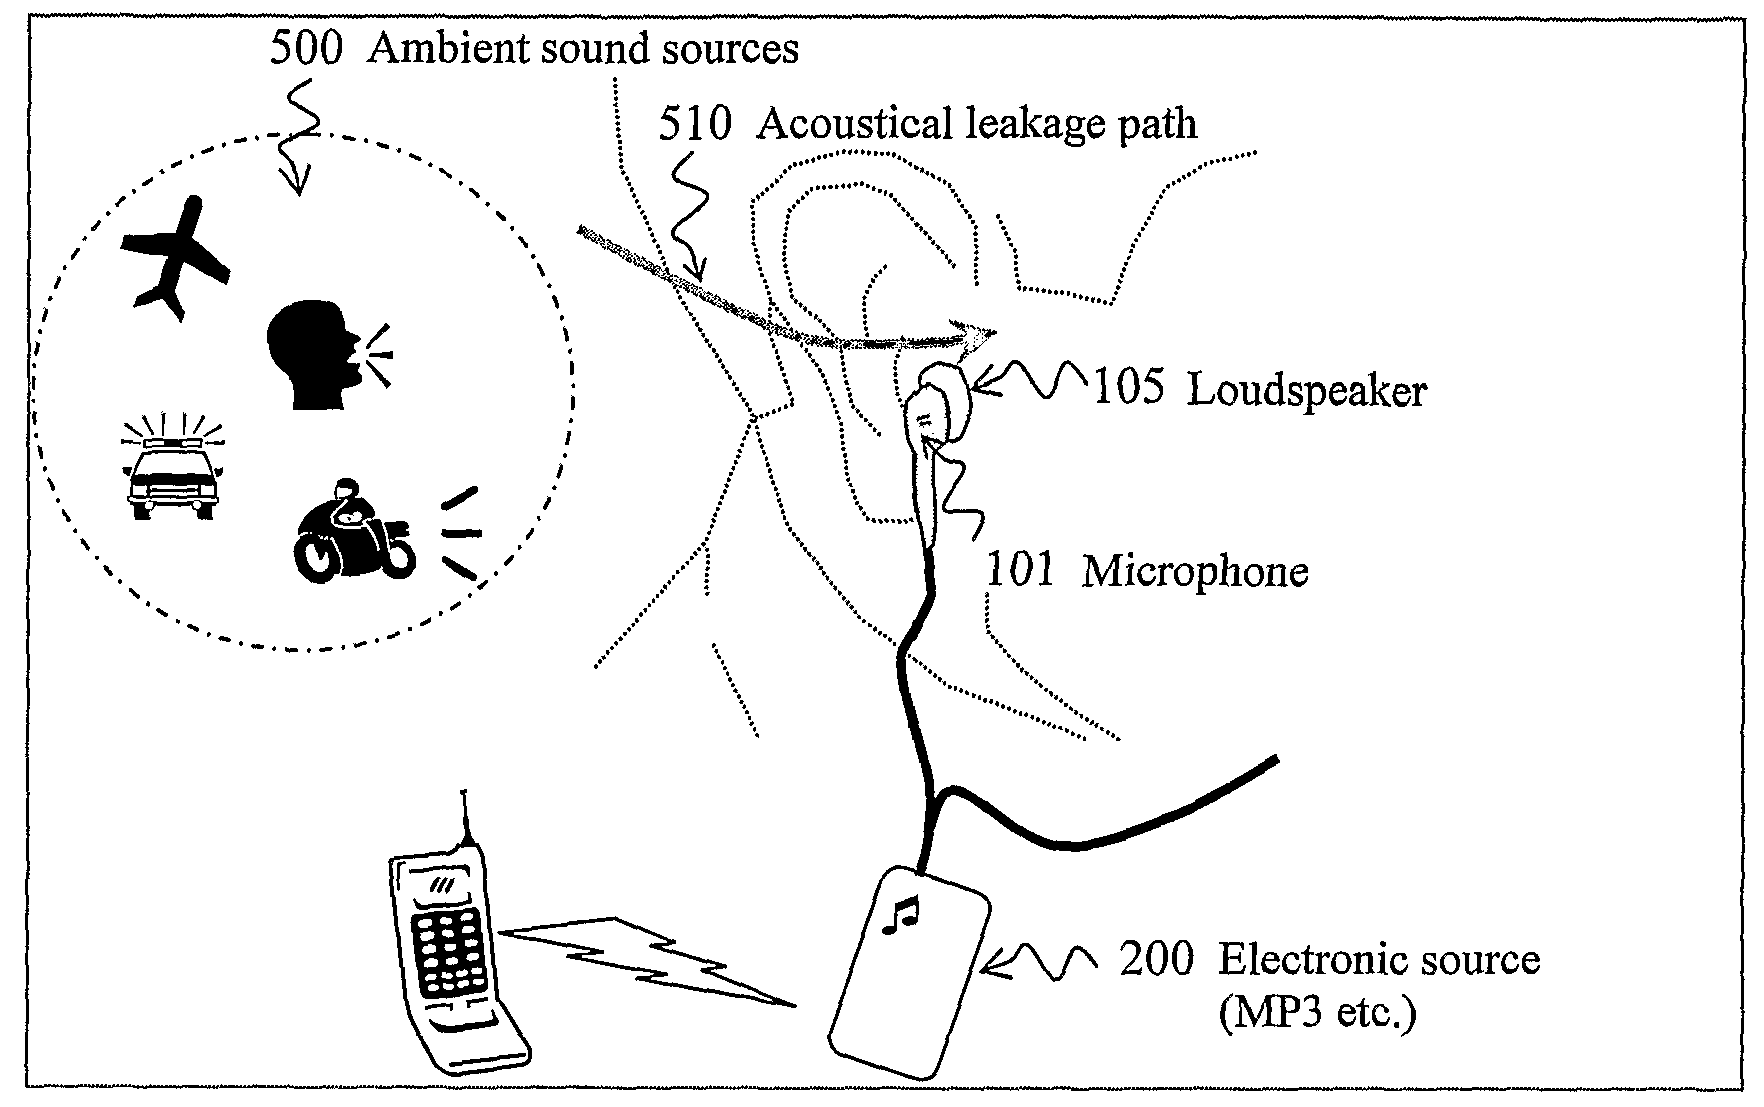 Apparatus for reducing the risk of noise induced hearing loss